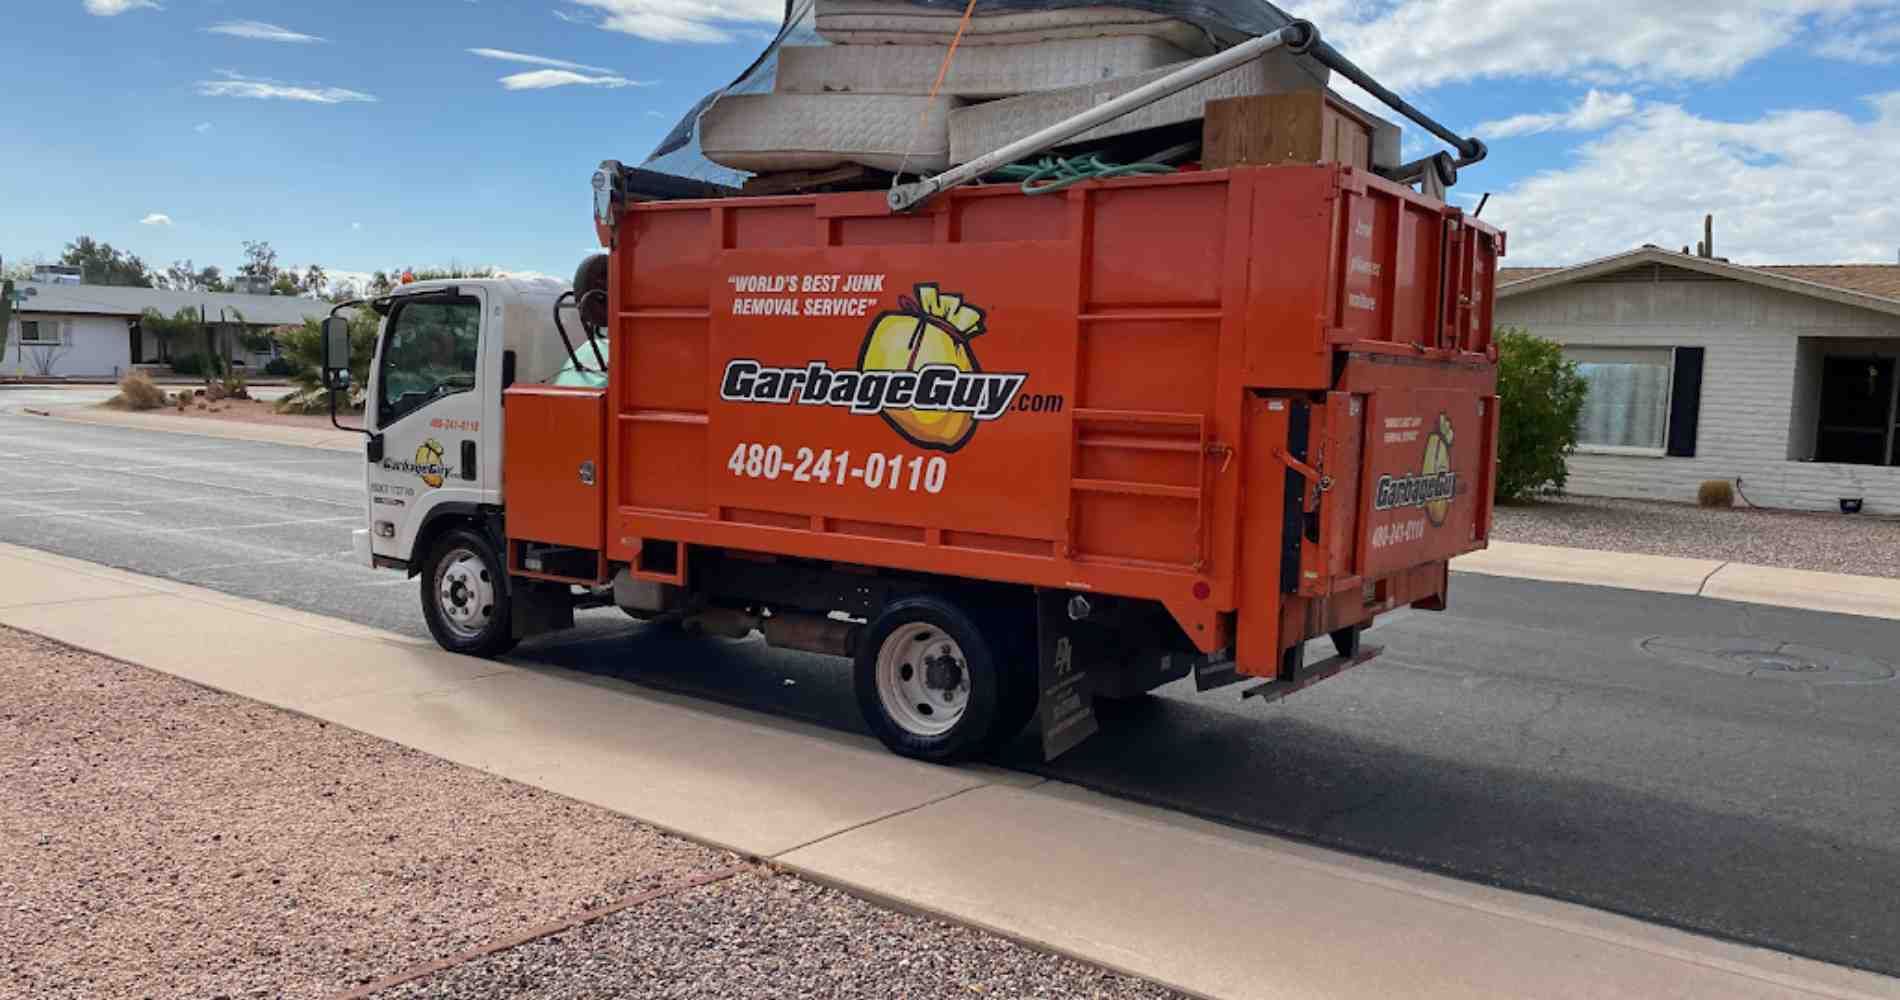 #1 for Curbside Trash Pickup in Chandler, AZ with Over 1200 5-Star Reviews!